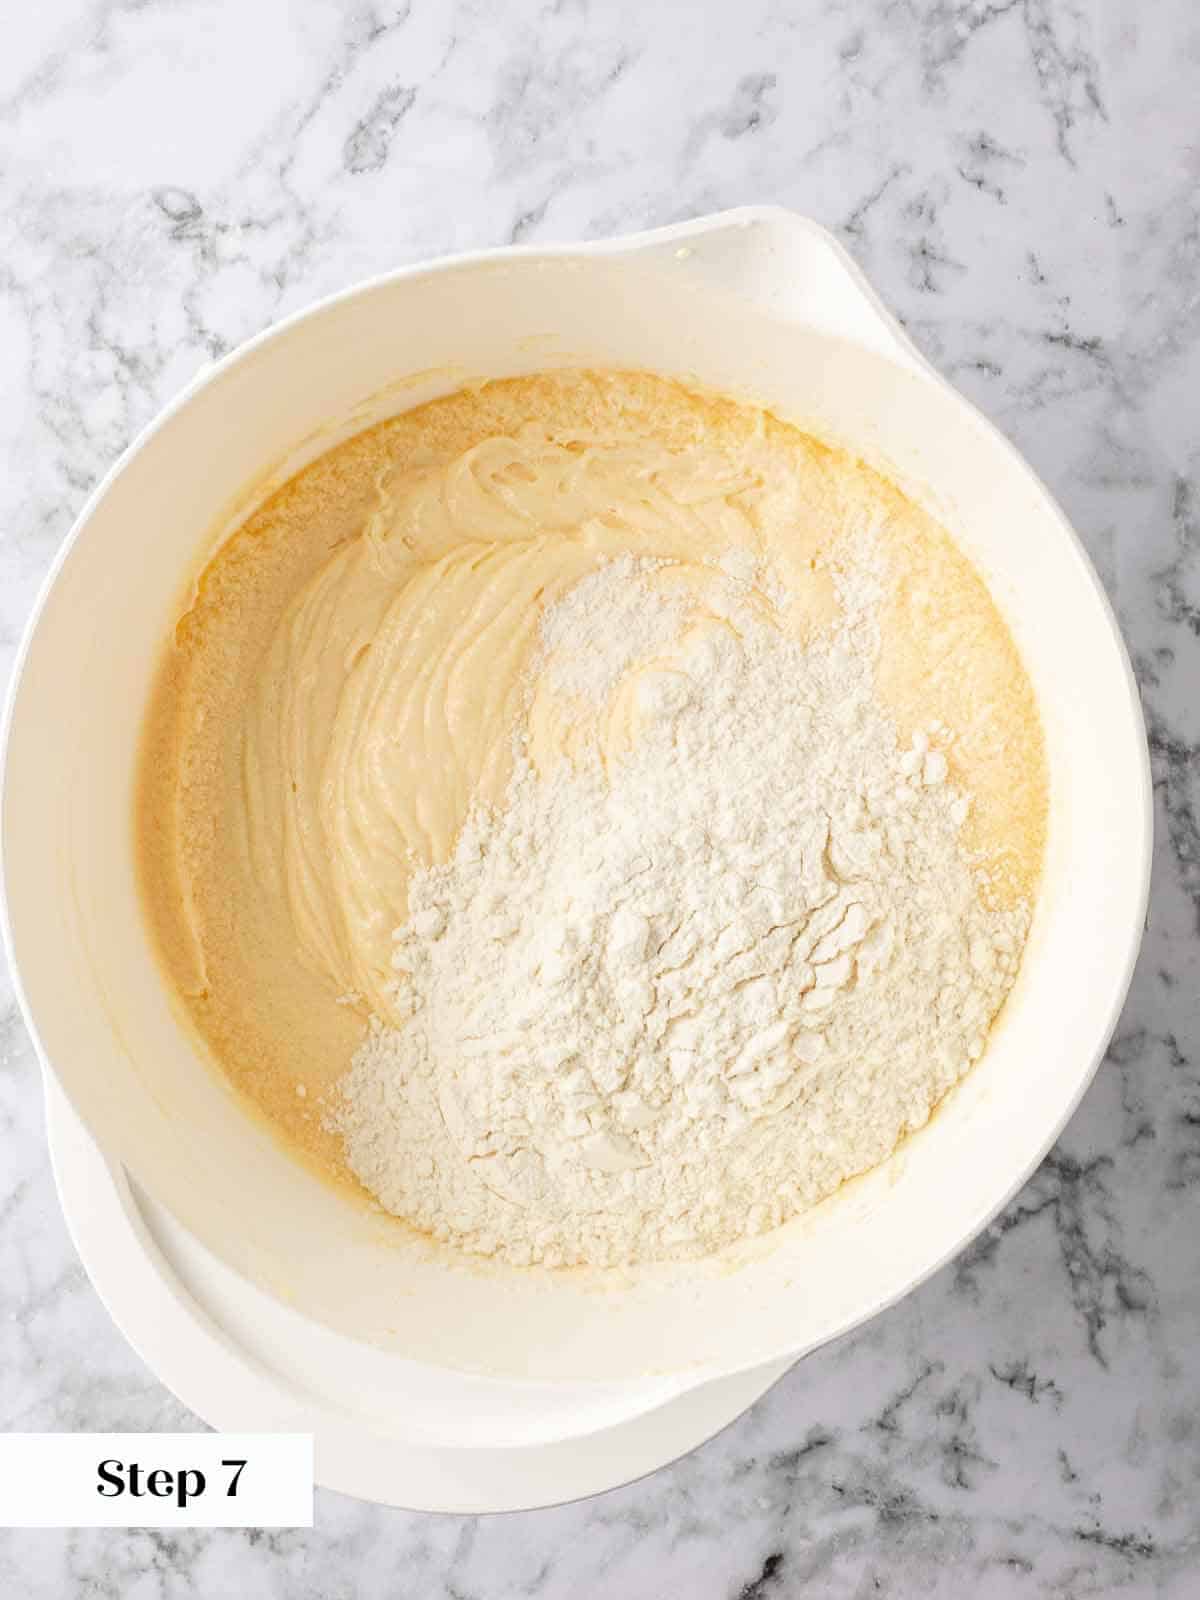 Mixing dry ingredients into the lemon pound cake batter.